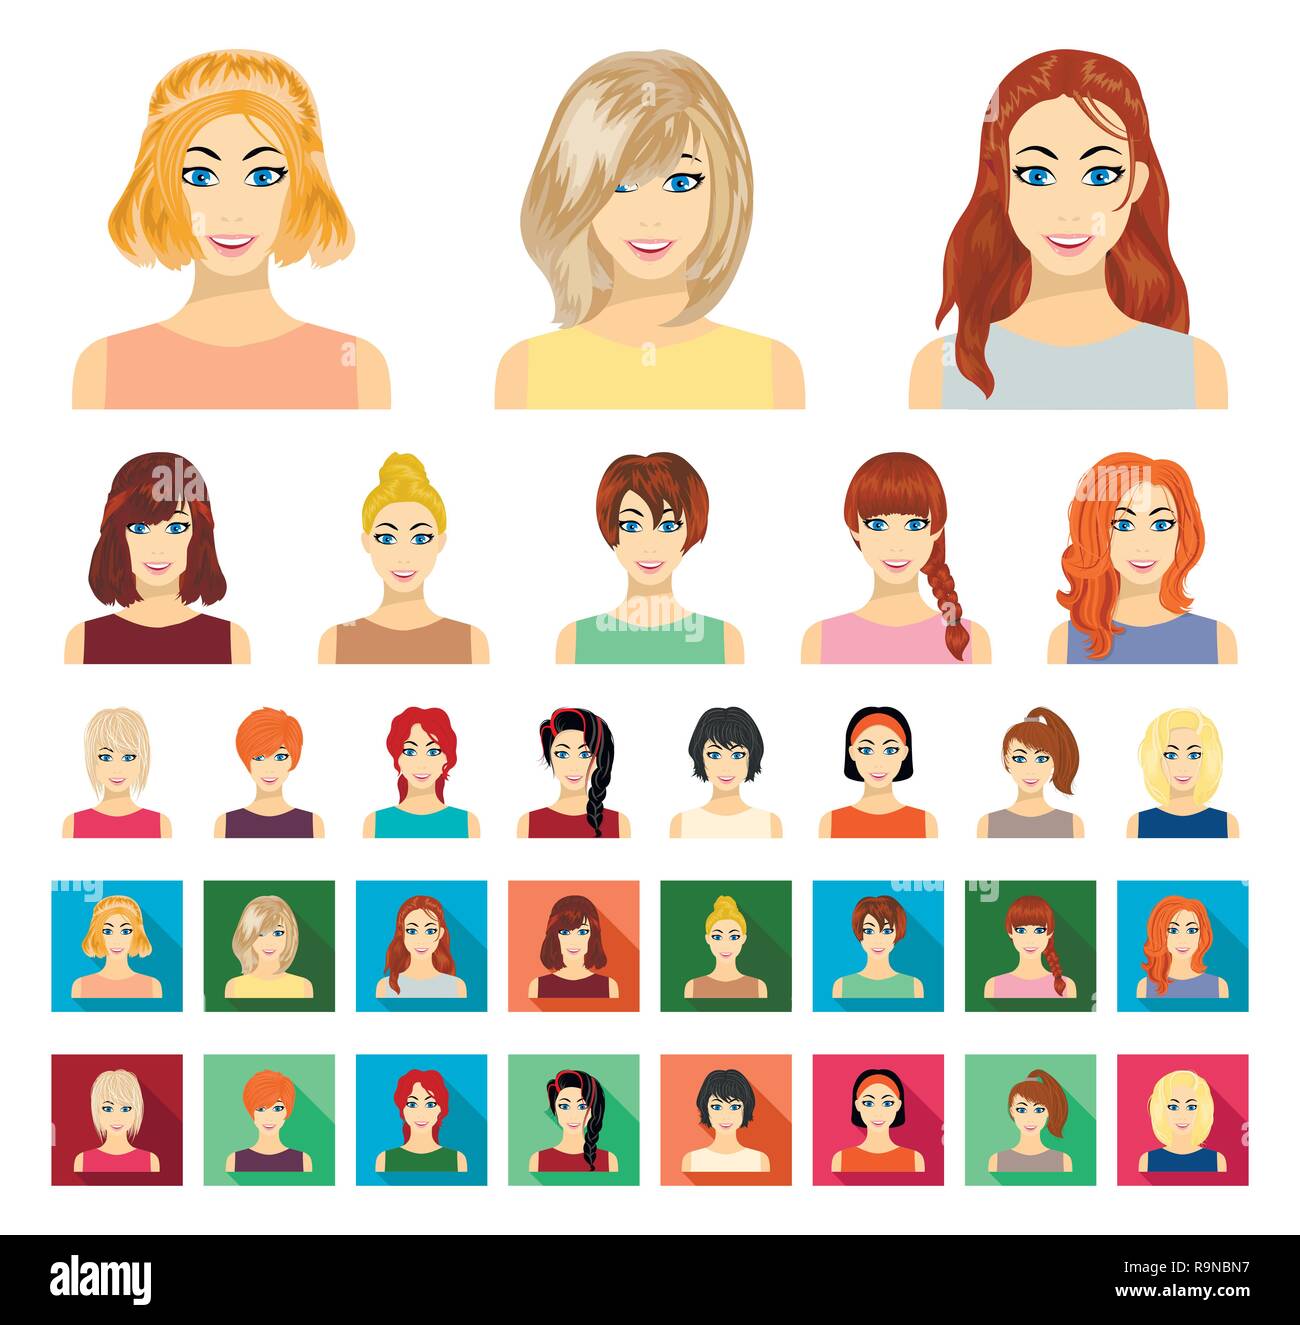 appearance,bangs,cartoon,flat,collection,curl,design ,different,fashion,female,girl,hair,haircut,hairstyle ,hairvariety,icon,illustration,image,isolated,logo,makeup,pigtail,portrait,set,sign, style,styling,symbol,tail,type,vector,view,web,woman, Vector ...